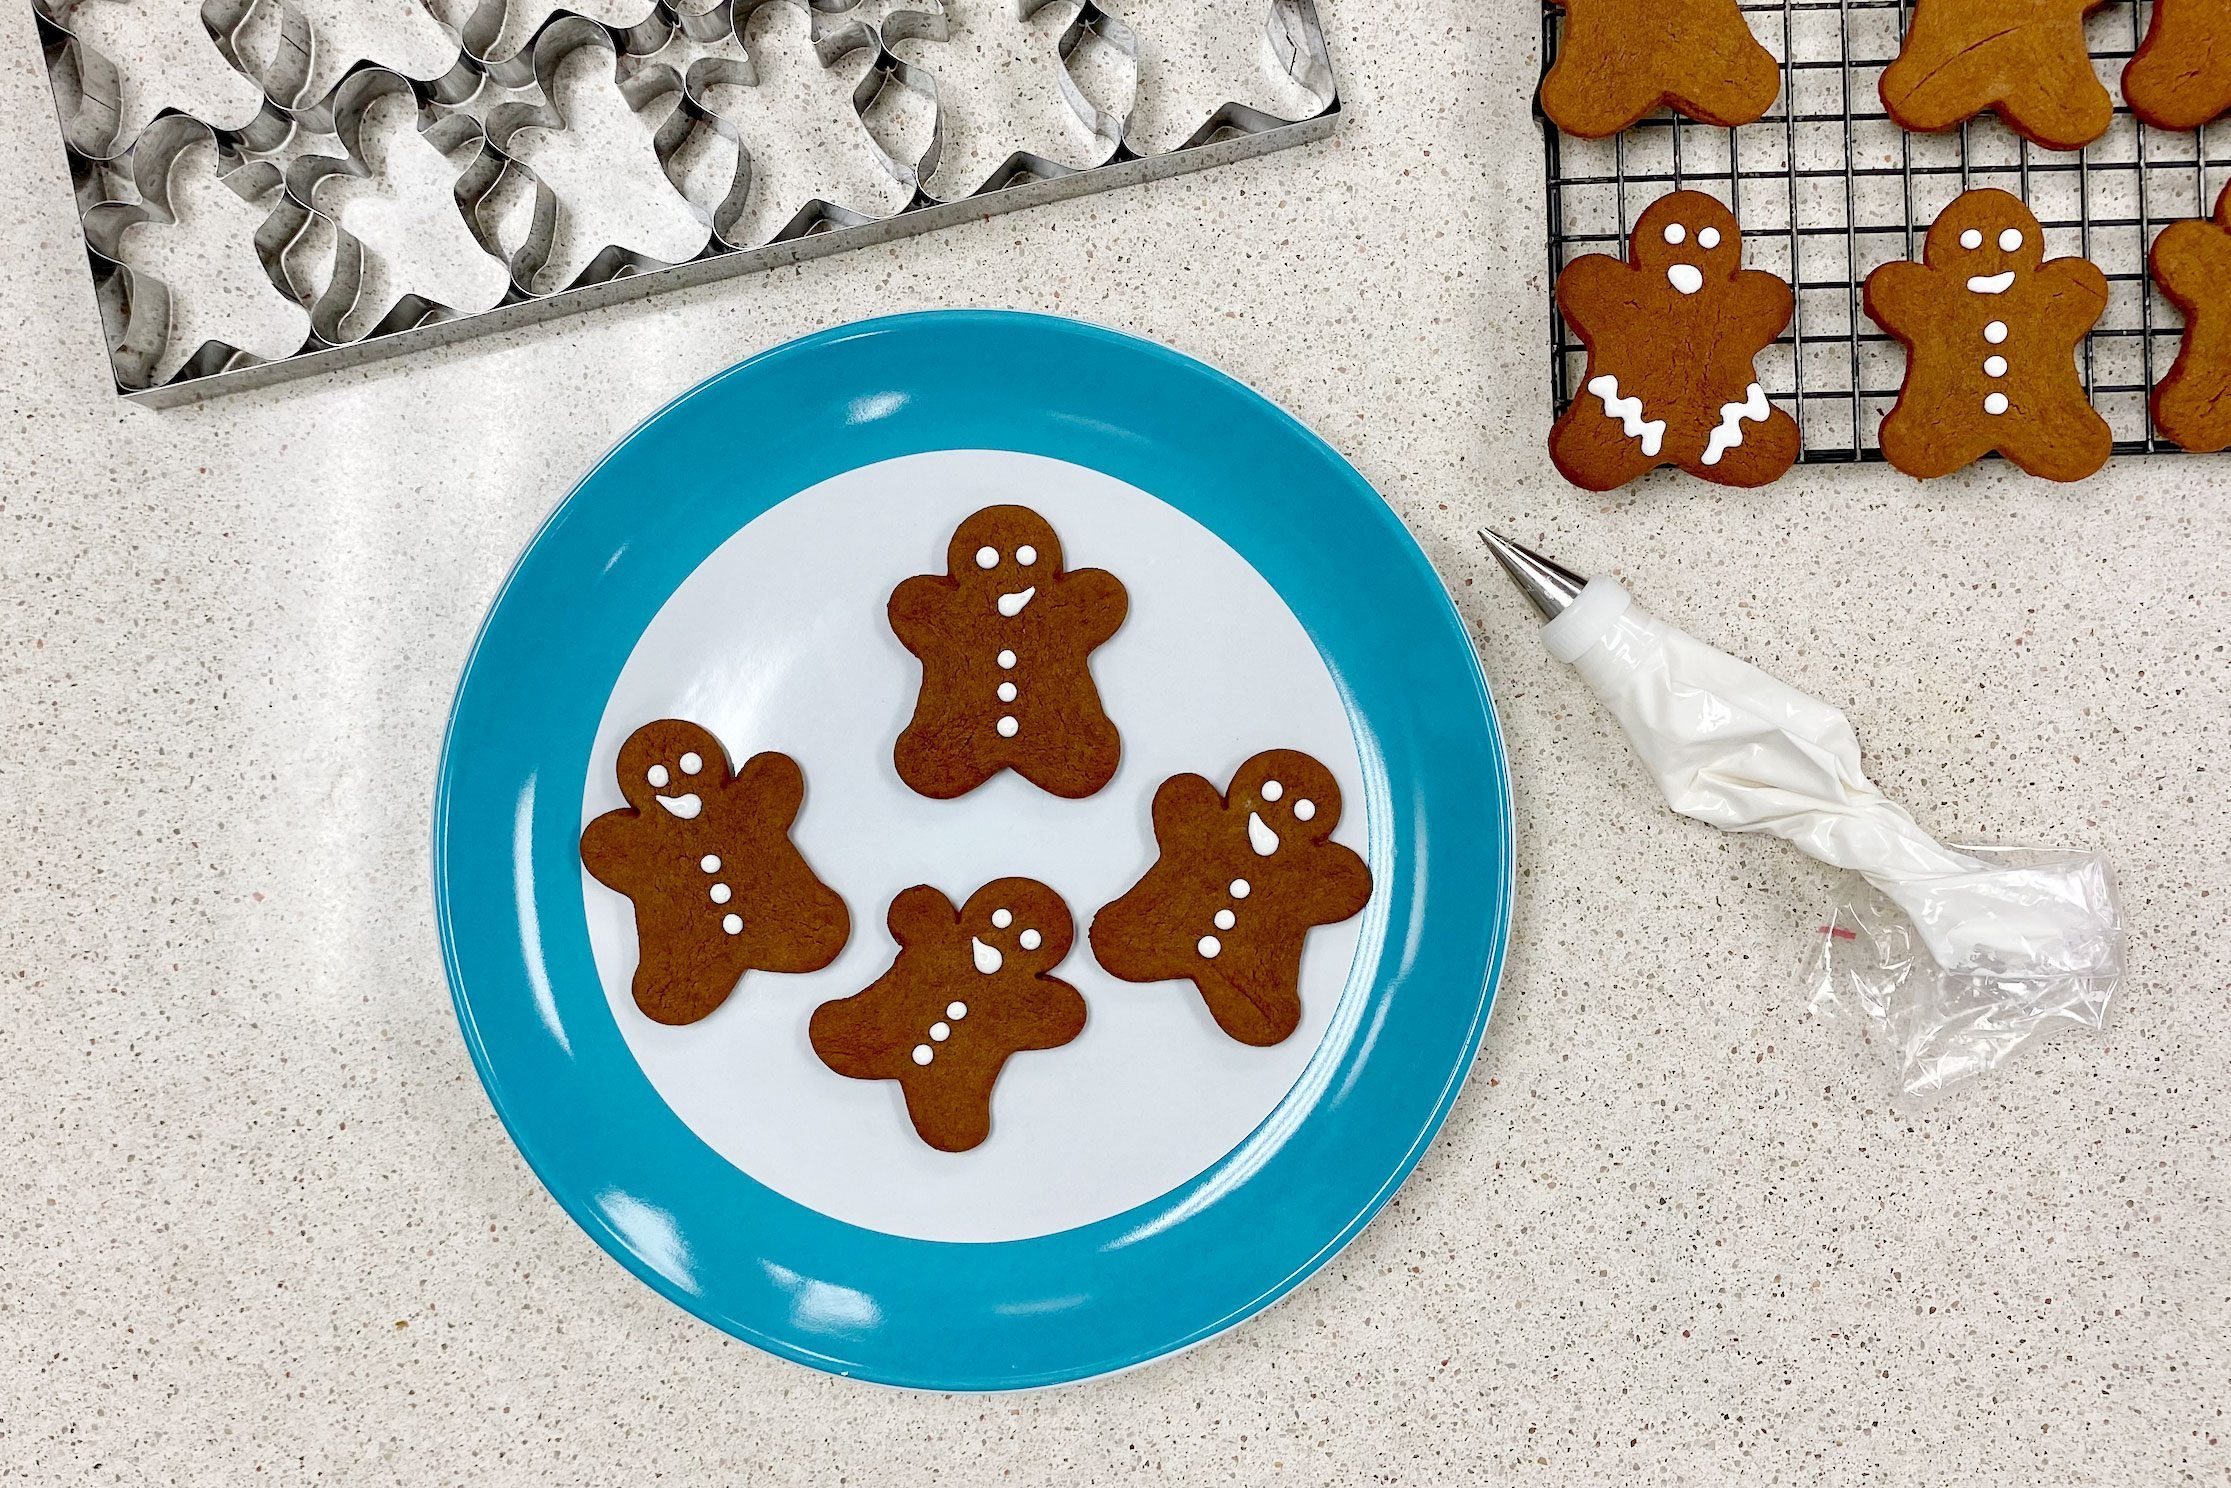 This Giant Gingerbread Cookie Cutter Will Make Holiday Baking a Breeze